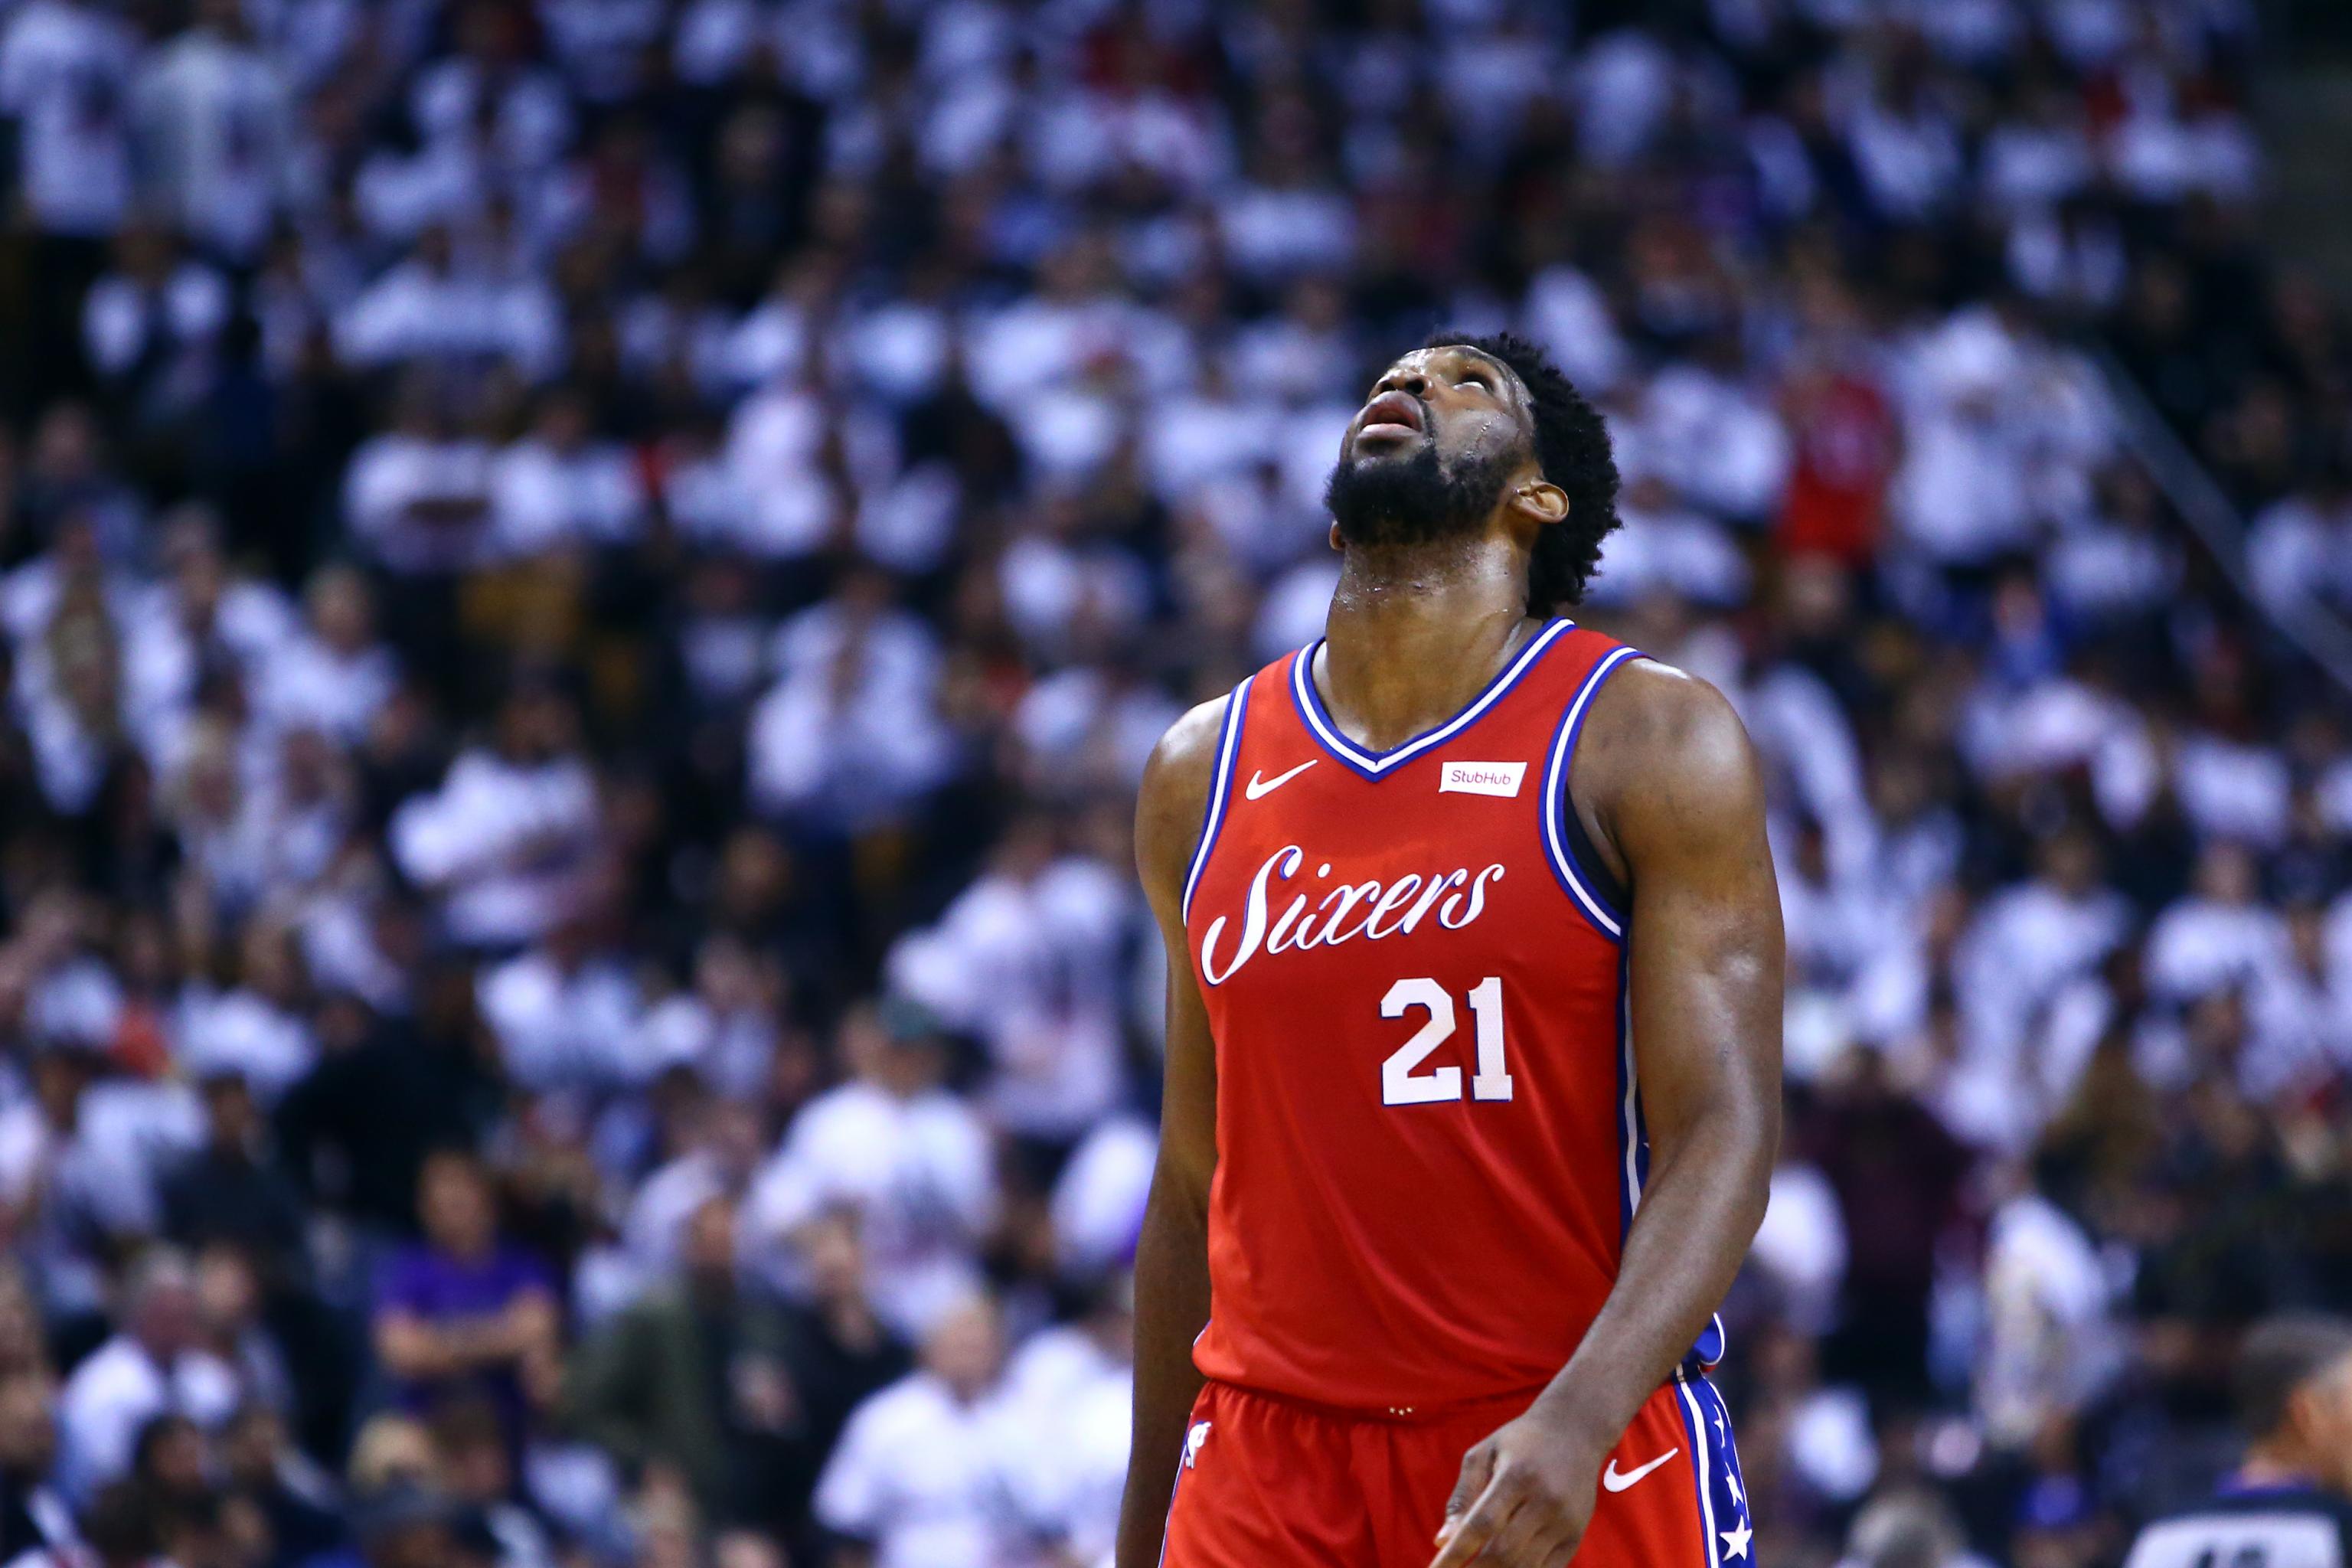 After a legendary return, Joel Embiid has given the Sixers new life in a  series they can win